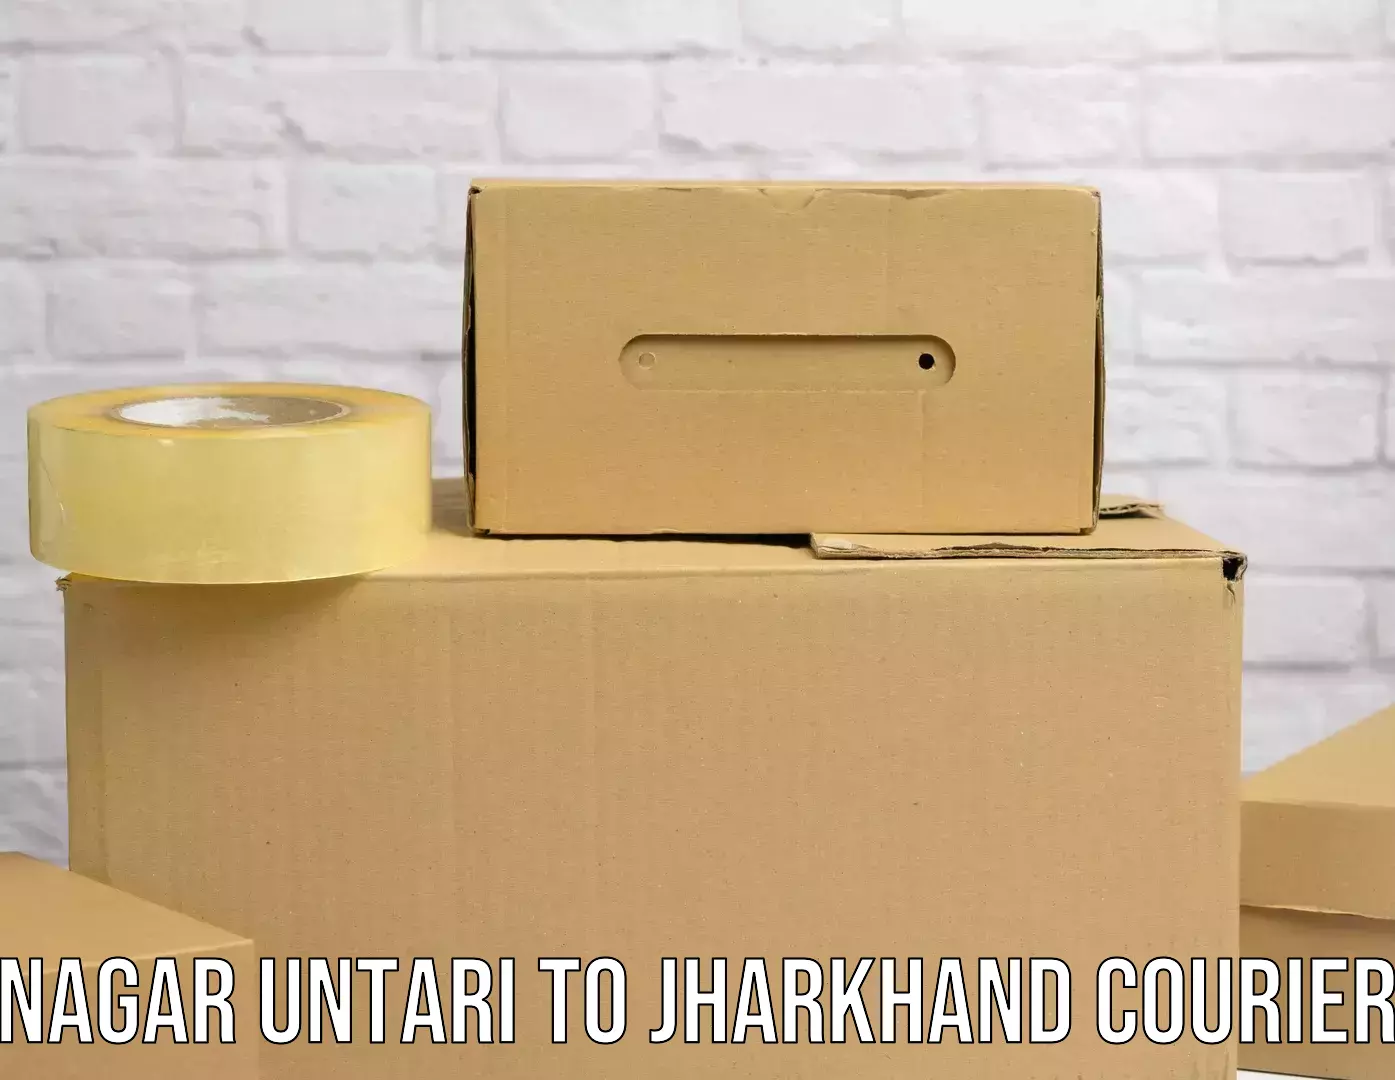 Corporate courier solutions Nagar Untari to Jharkhand